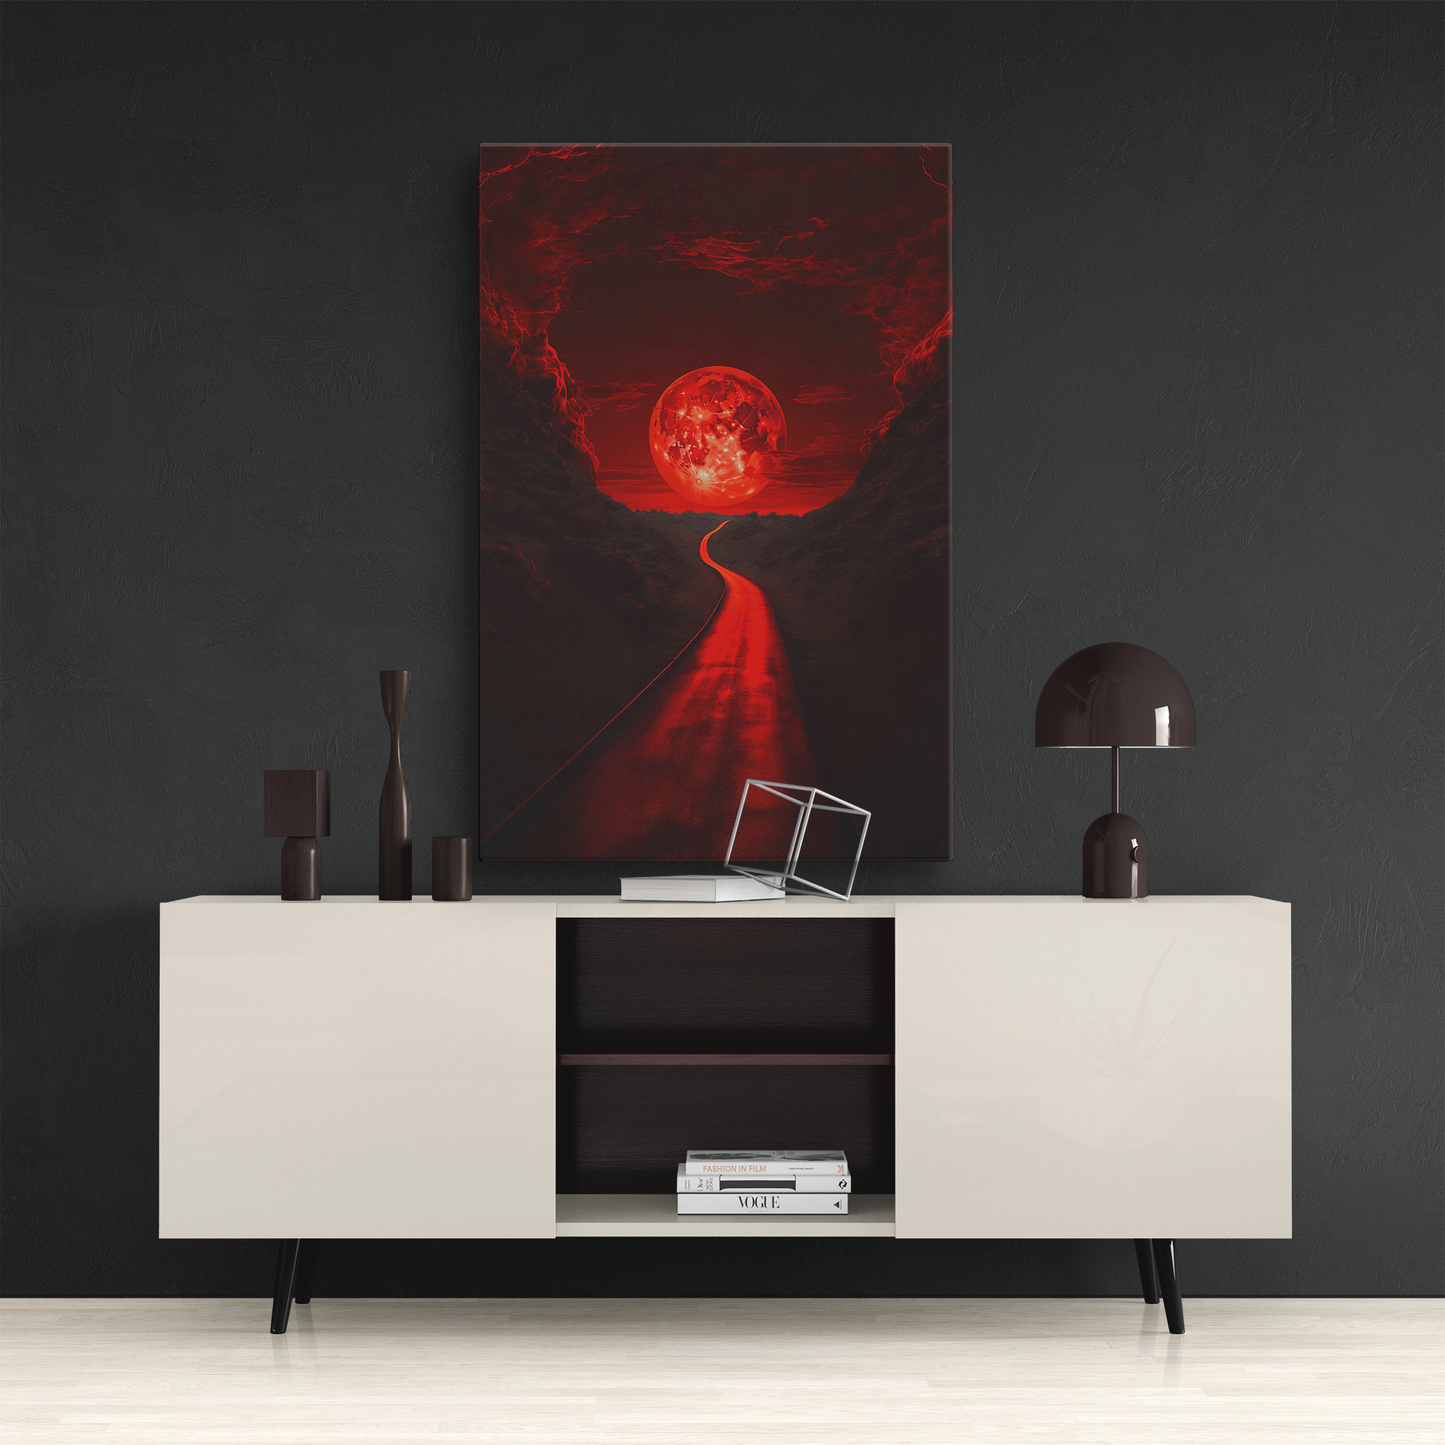 Crimson Pathway (Canvas)Crimson Pathway (Canvas  Matte finish, stretched, with a depth of 1.25 inches) Elevate your décor with RimaGallery’s responsibly made art canvases. Our eco-friendly RimaGallery